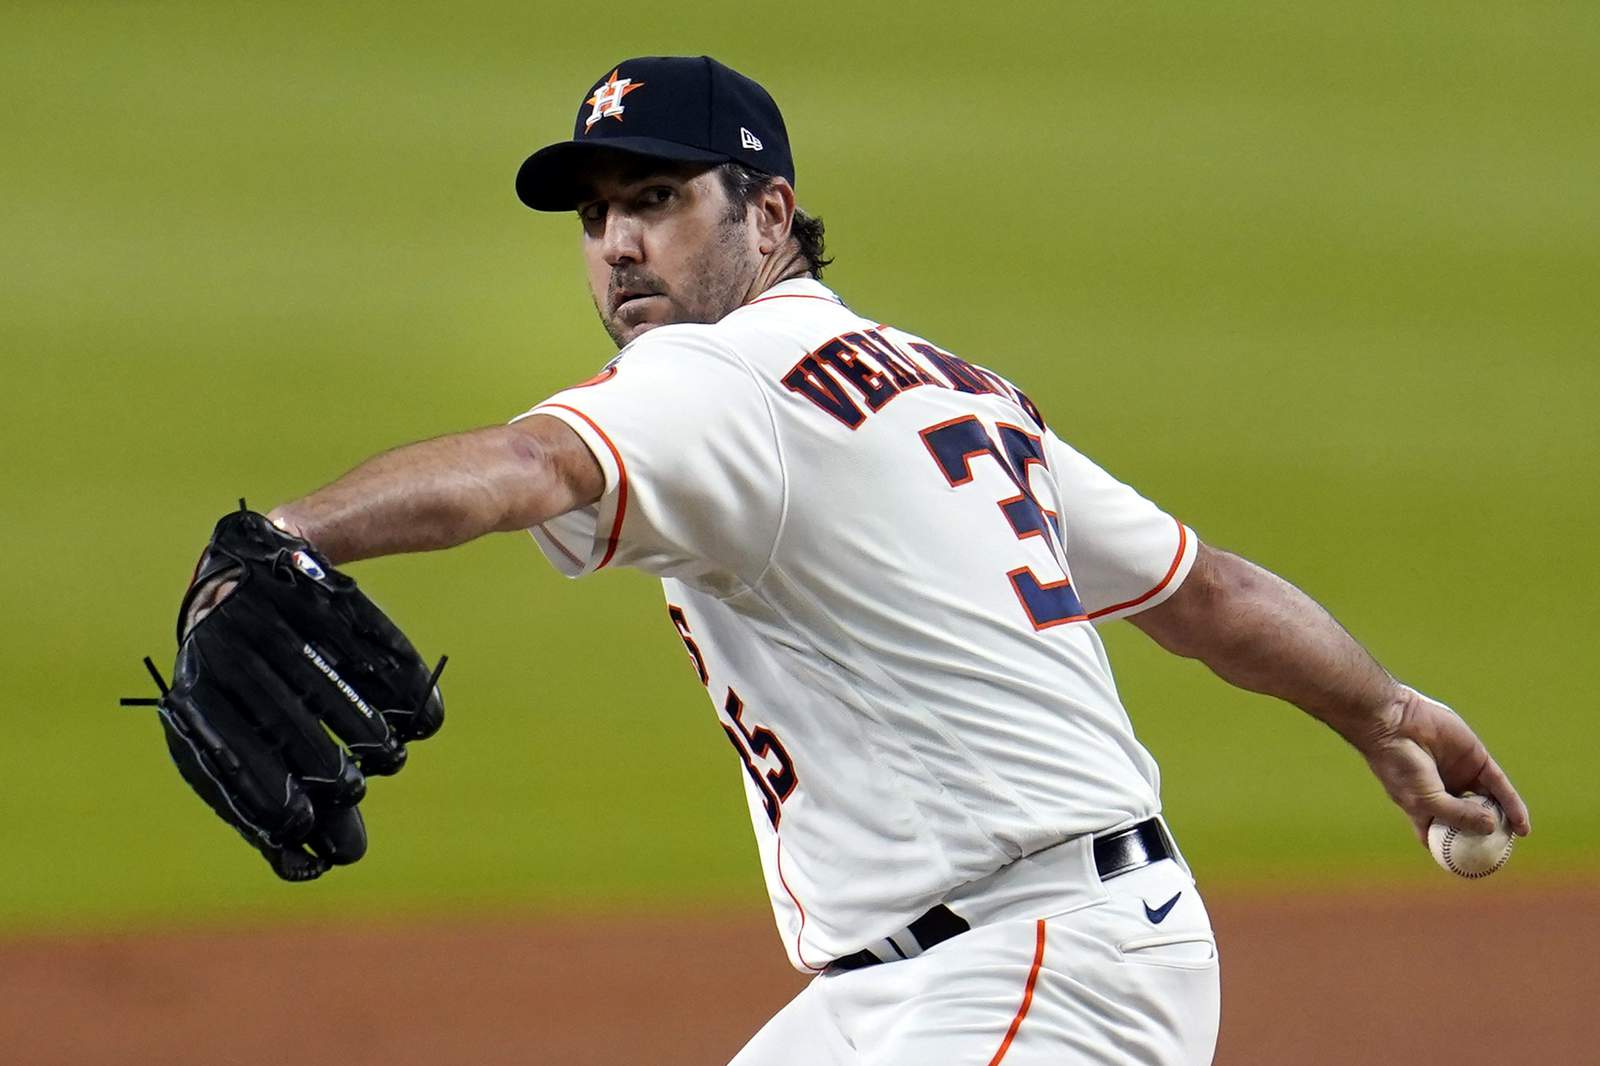 Astros' Verlander needs elbow surgery, likely out thru 2021